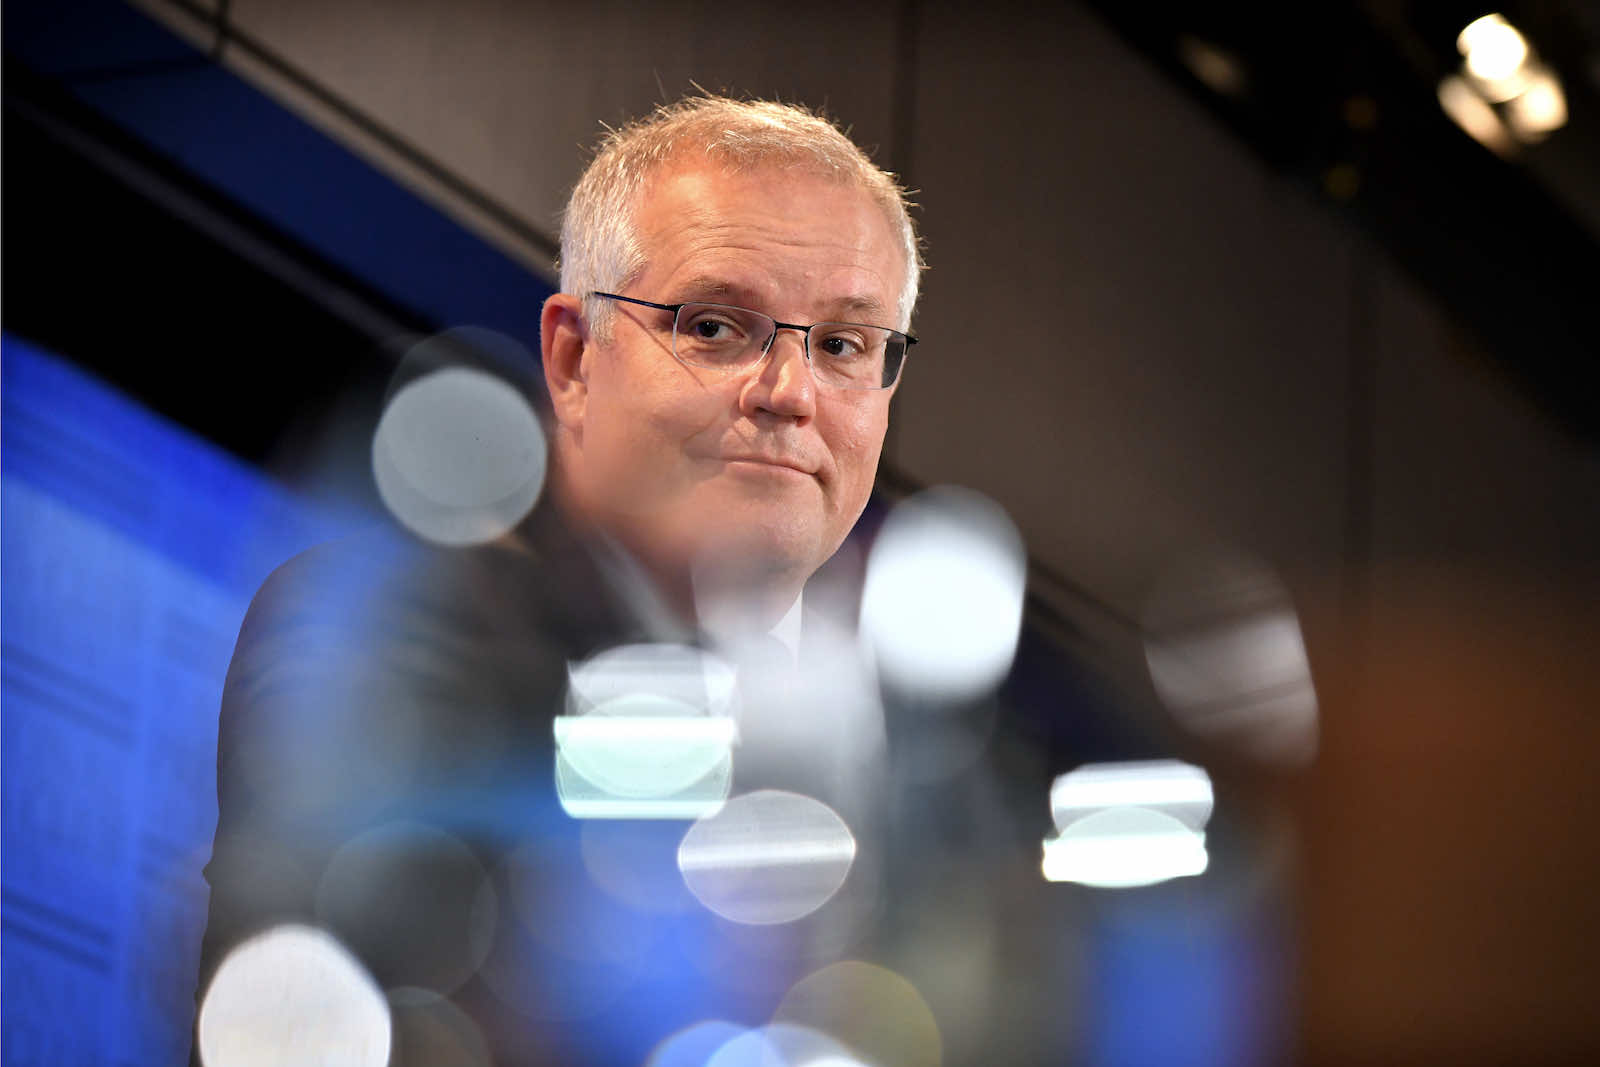 Prime Minister Scott Morrison has said concessions will not be the topic of any high-level Australia-China talks (Mark Graham/Bloomberg via Getty Images)